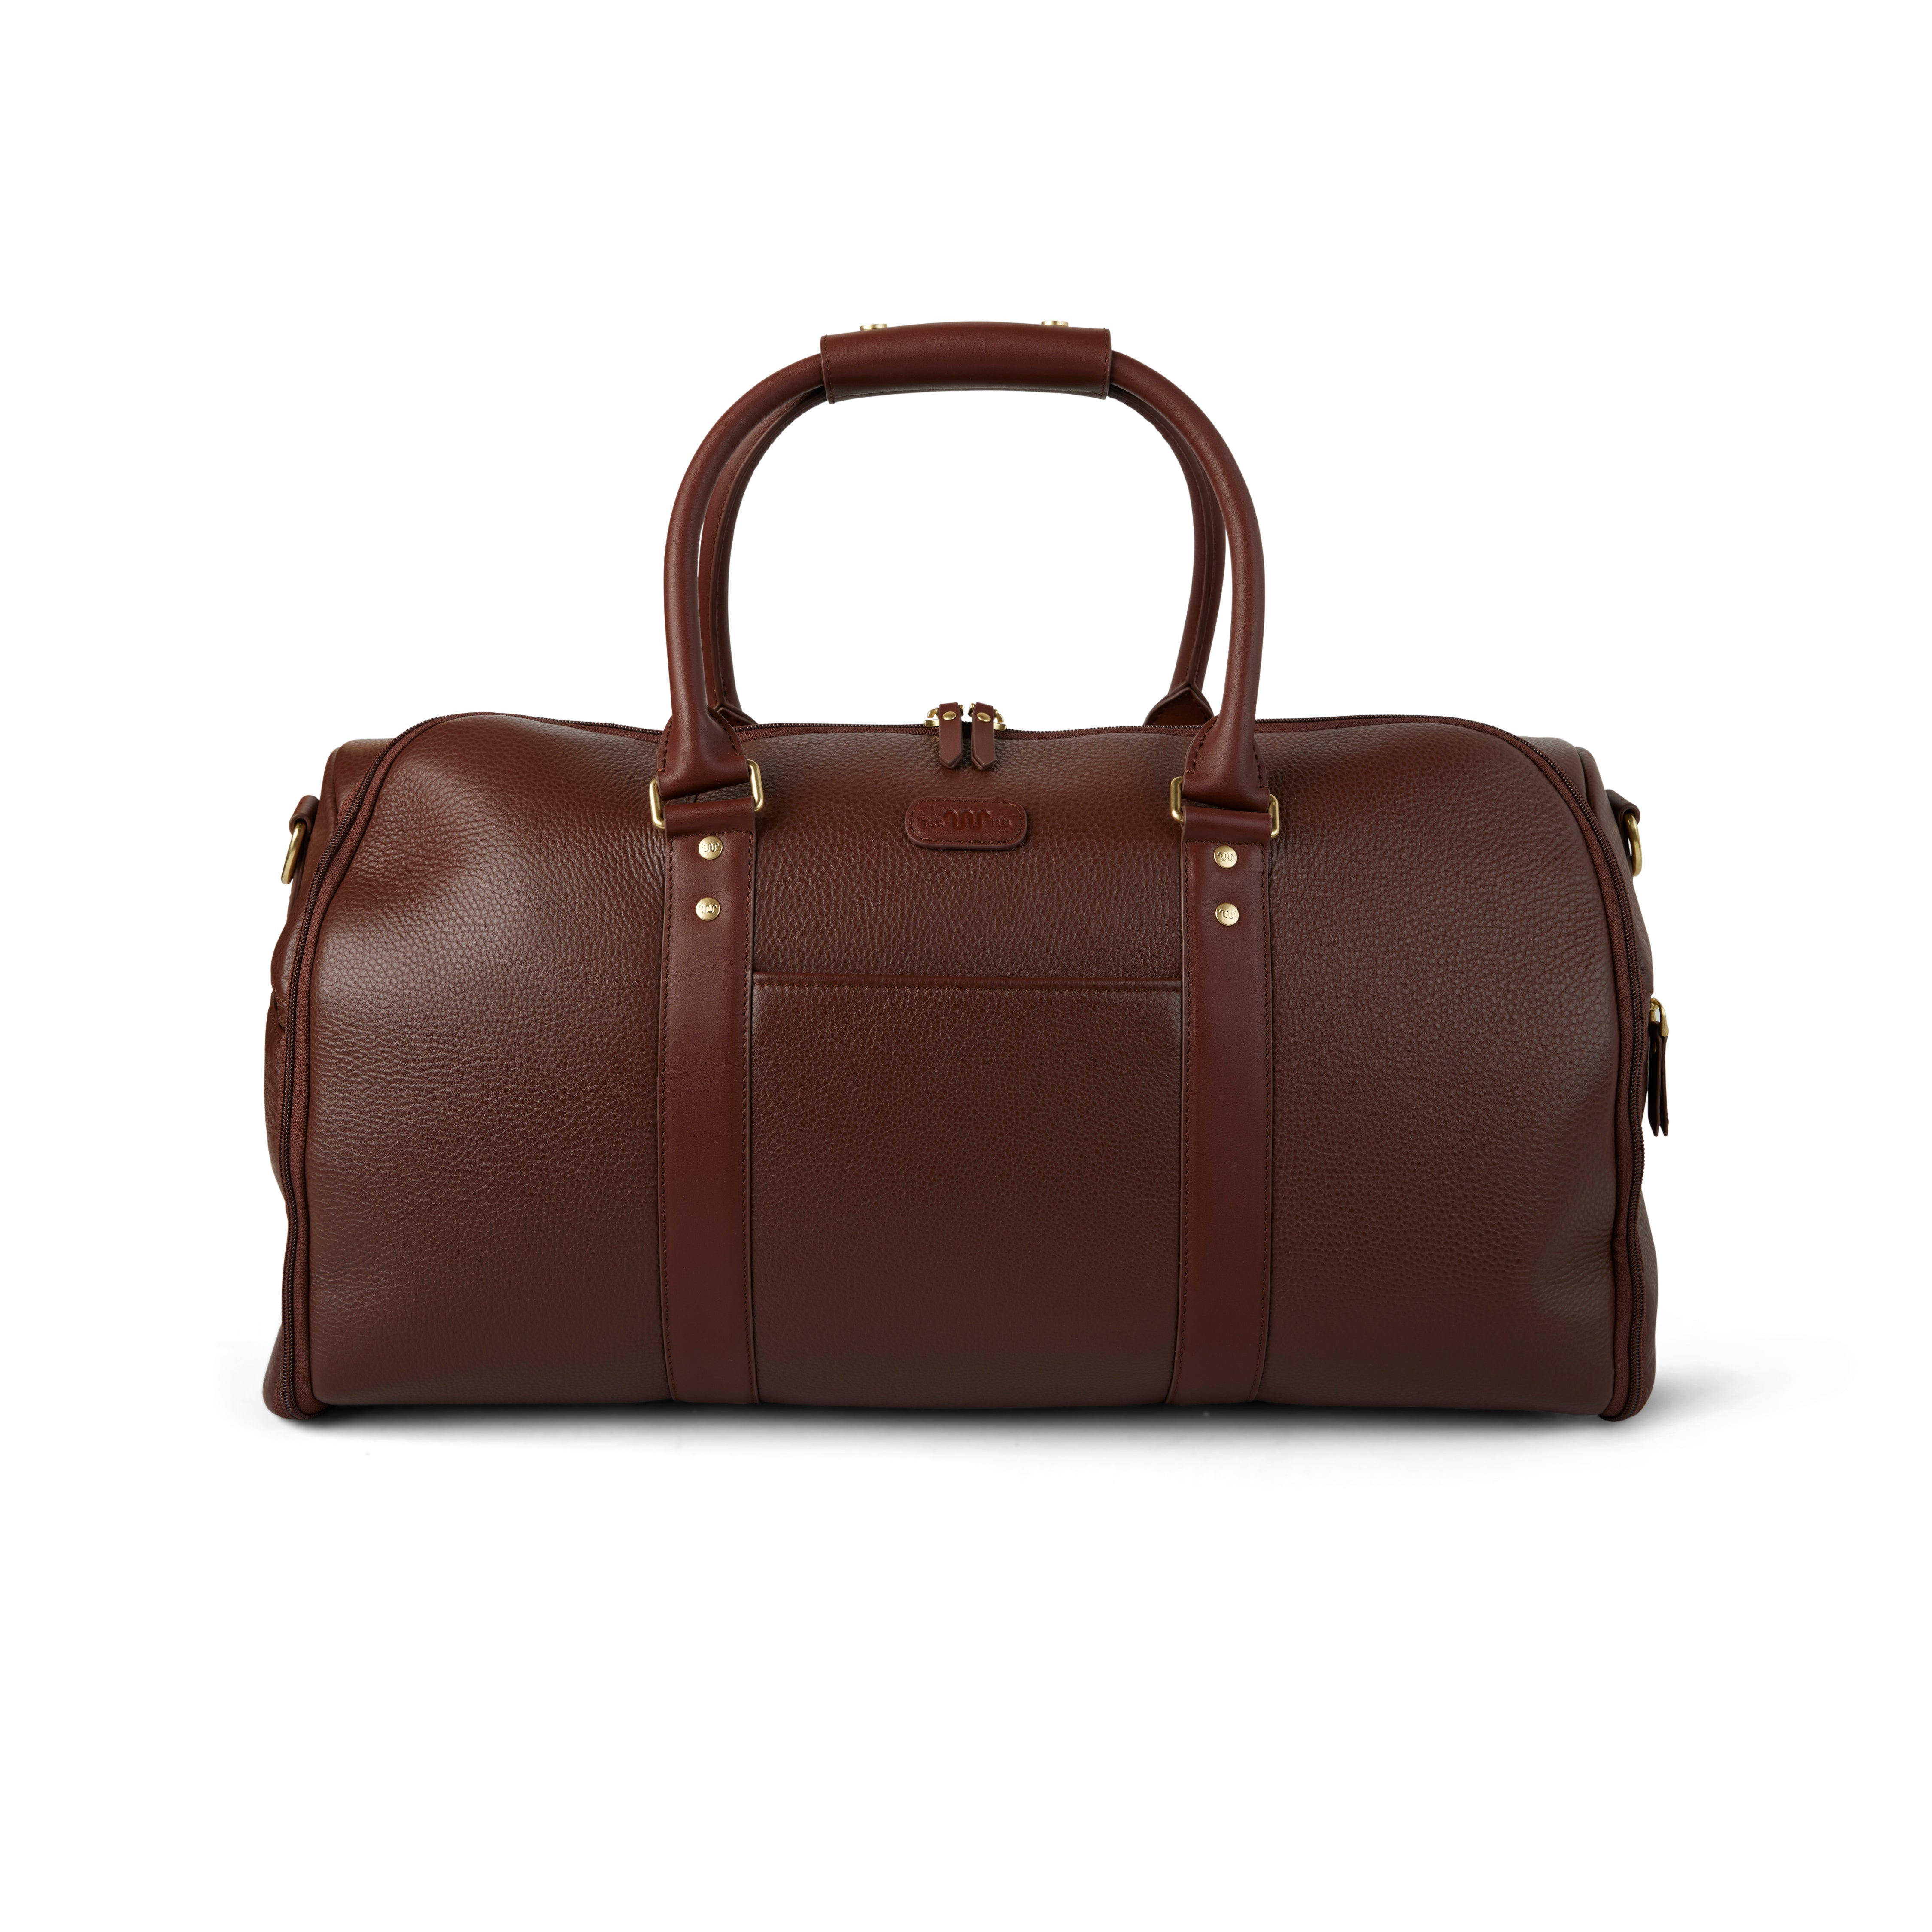 Justus Garment Duffel Bag - Leather Carry On Luggage & Travel Gear ...